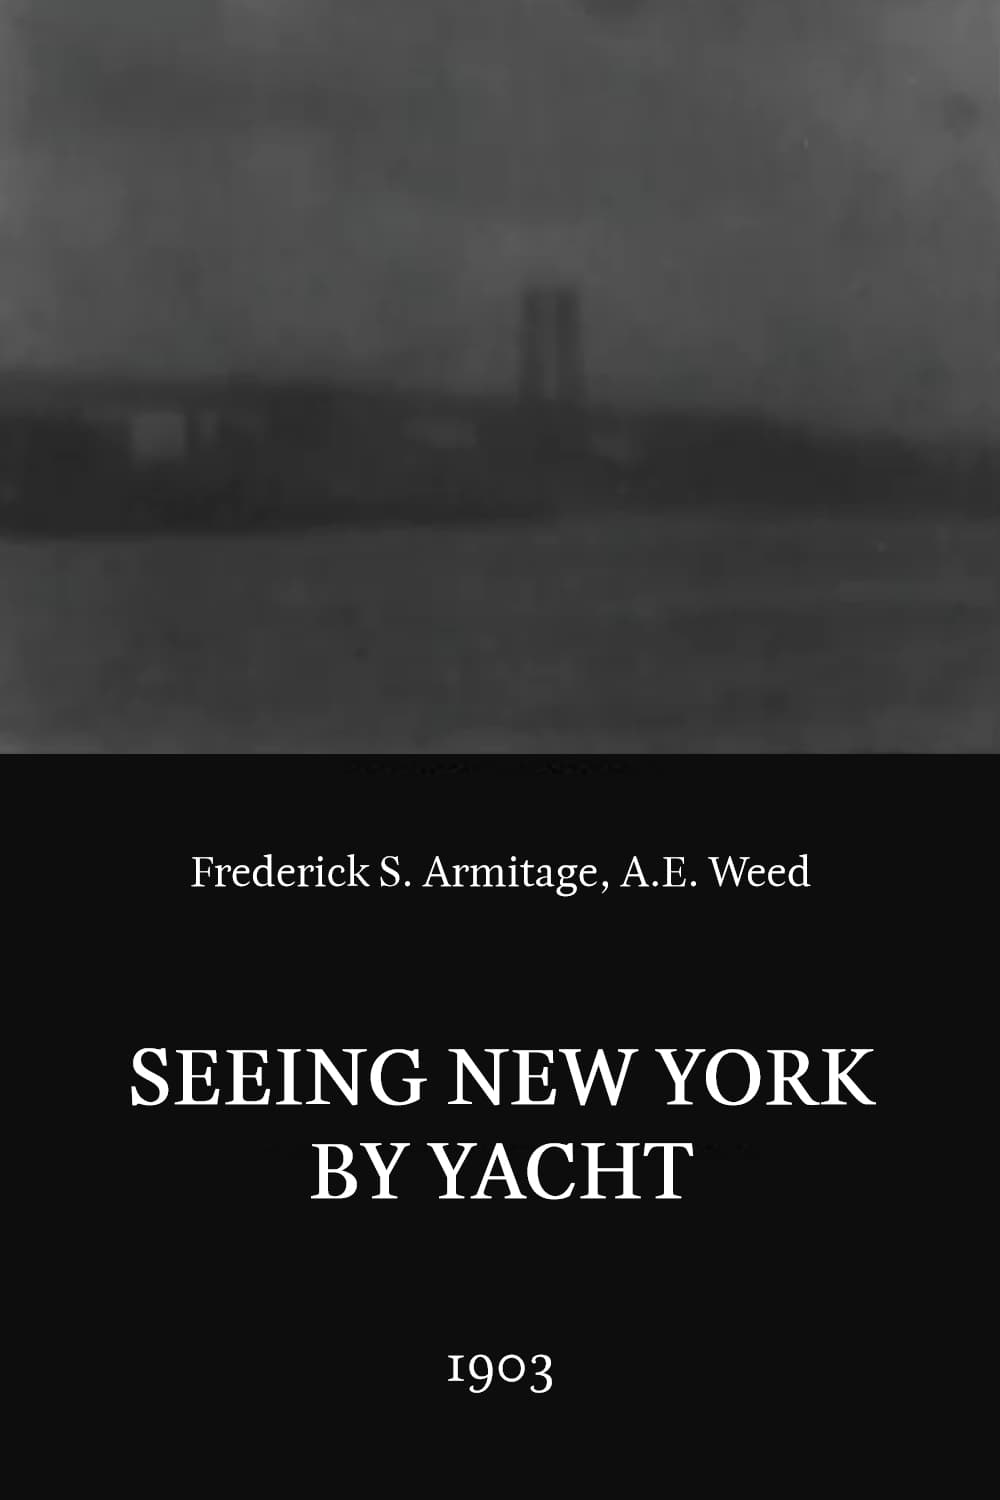 Seeing New York by Yacht